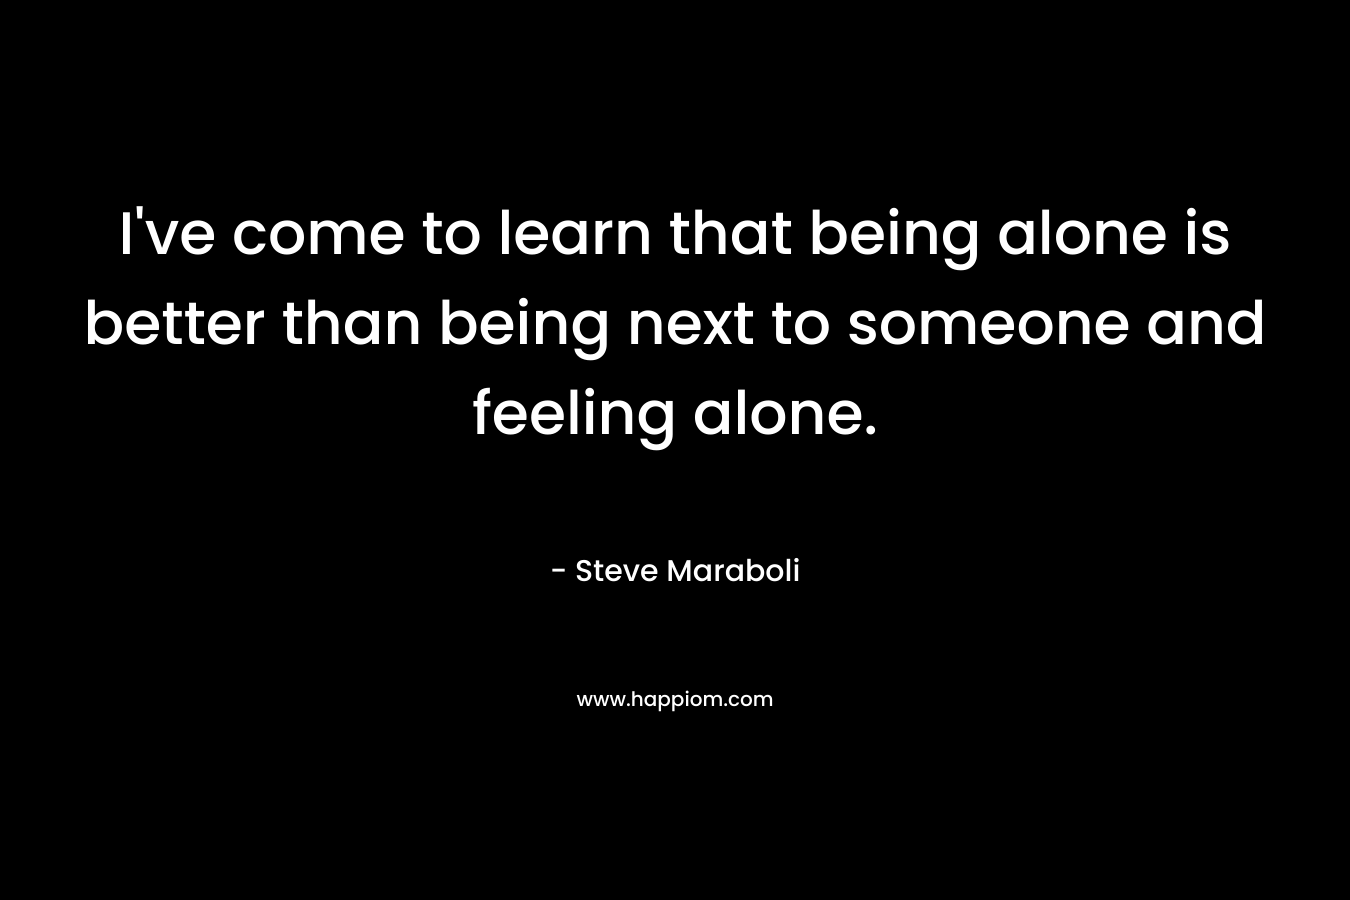 I've come to learn that being alone is better than being next to someone and feeling alone.